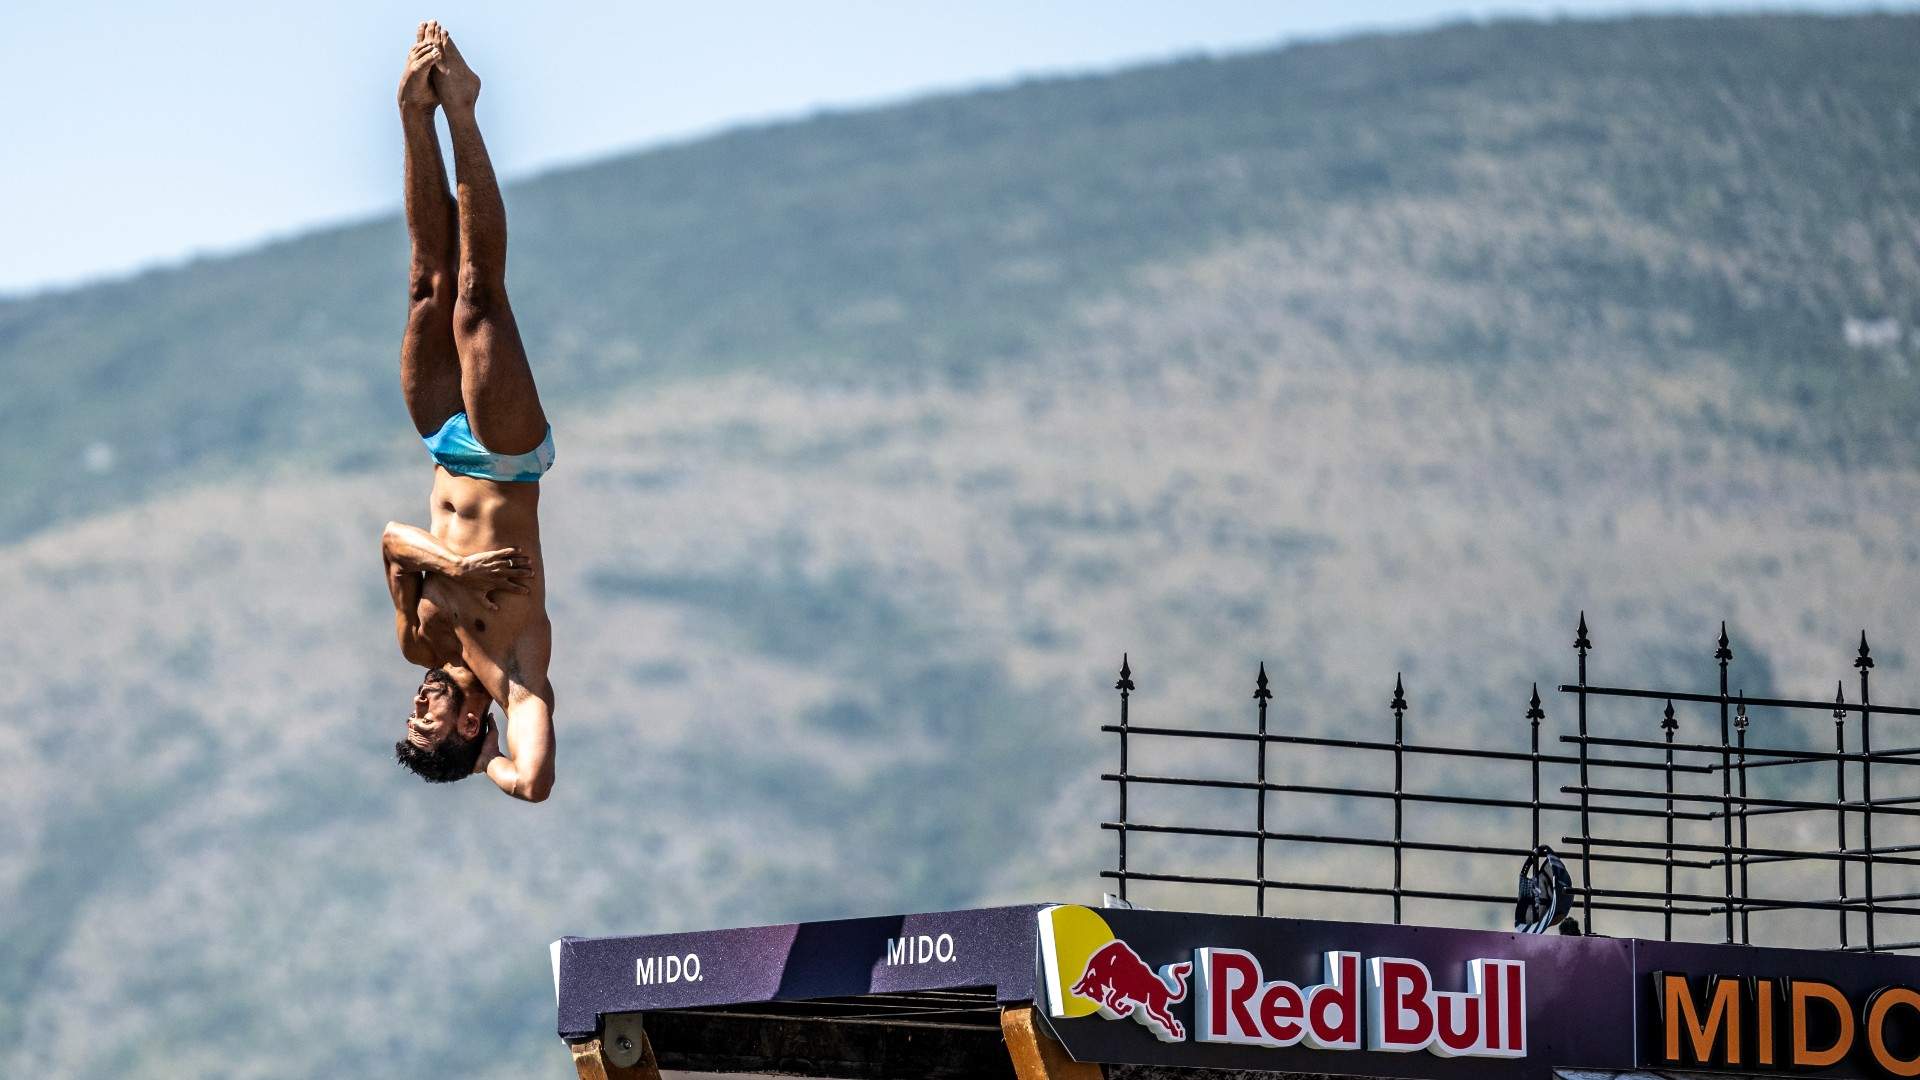 Red Bull Cliff Diving World Series 2023